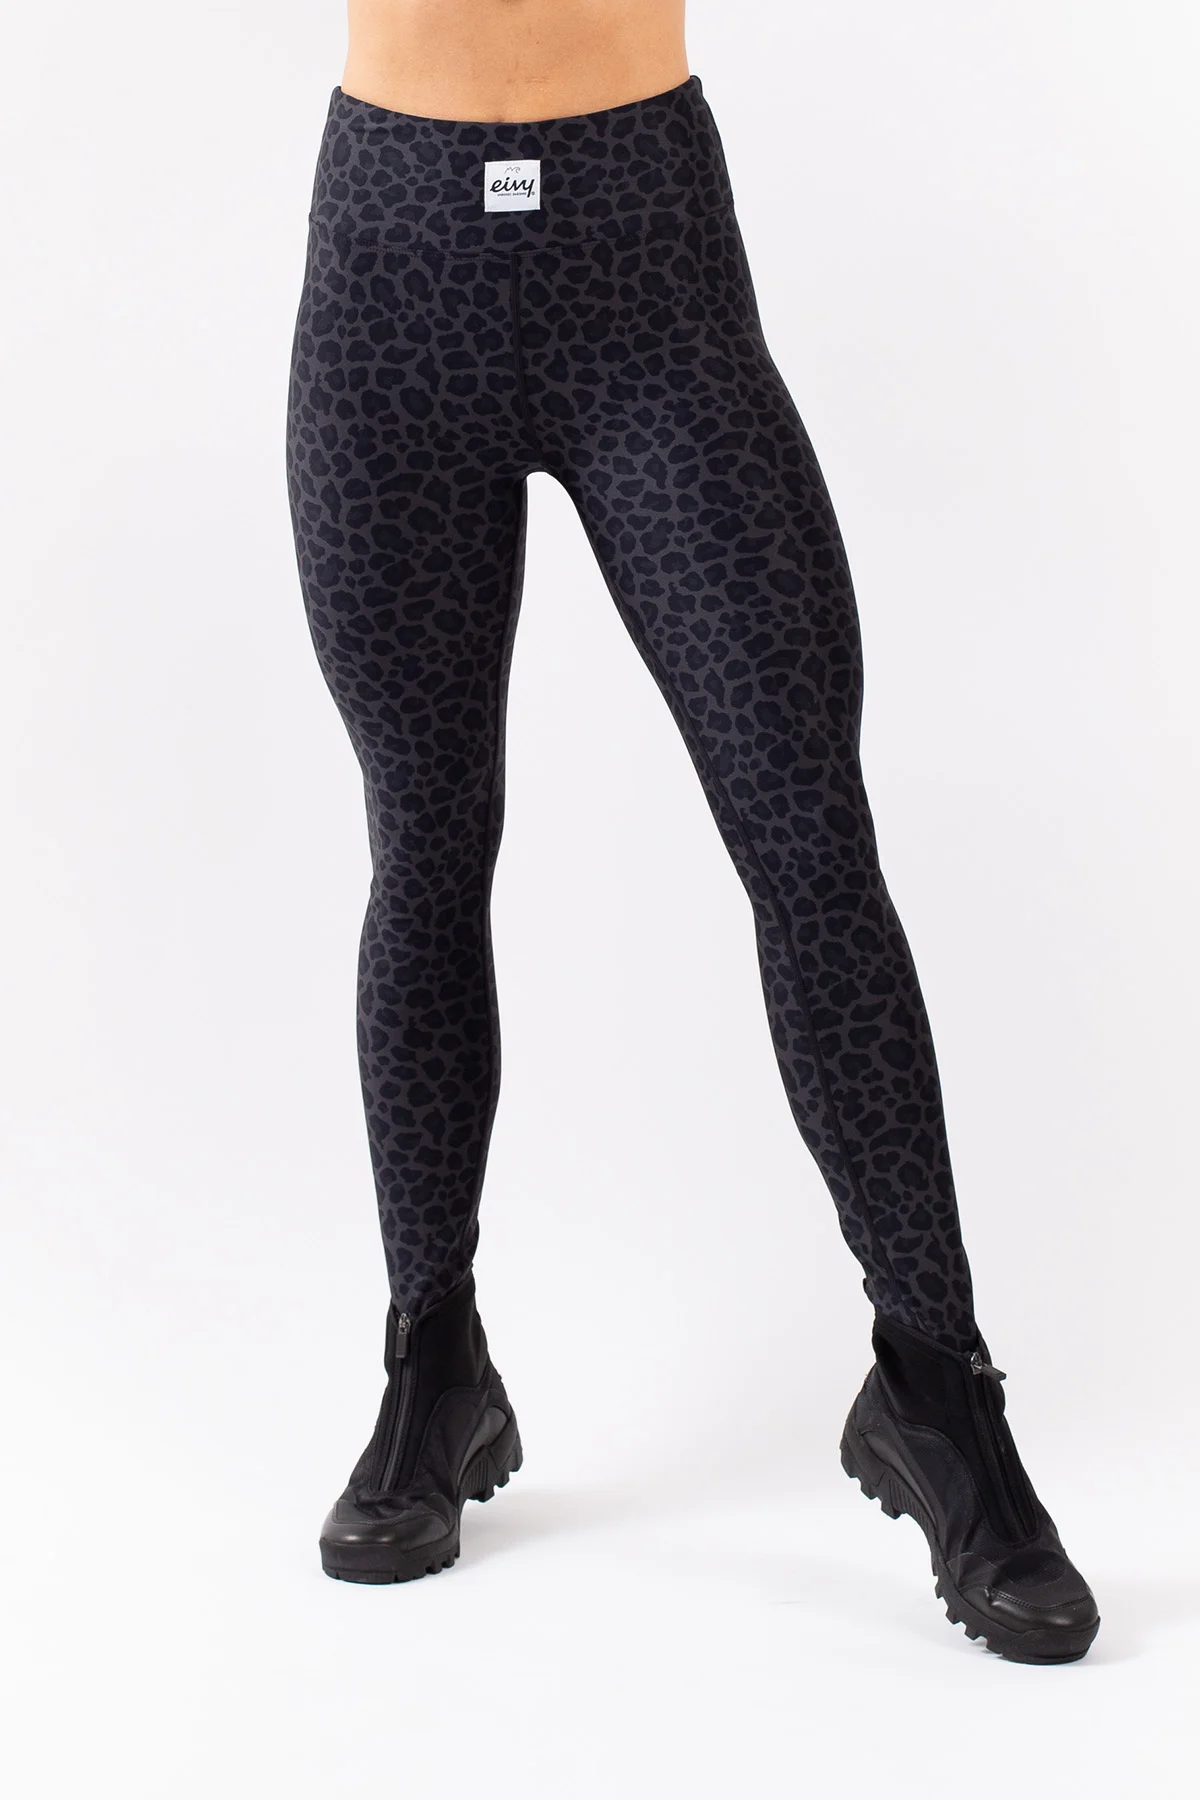 Icecold Tights - Black Leopard